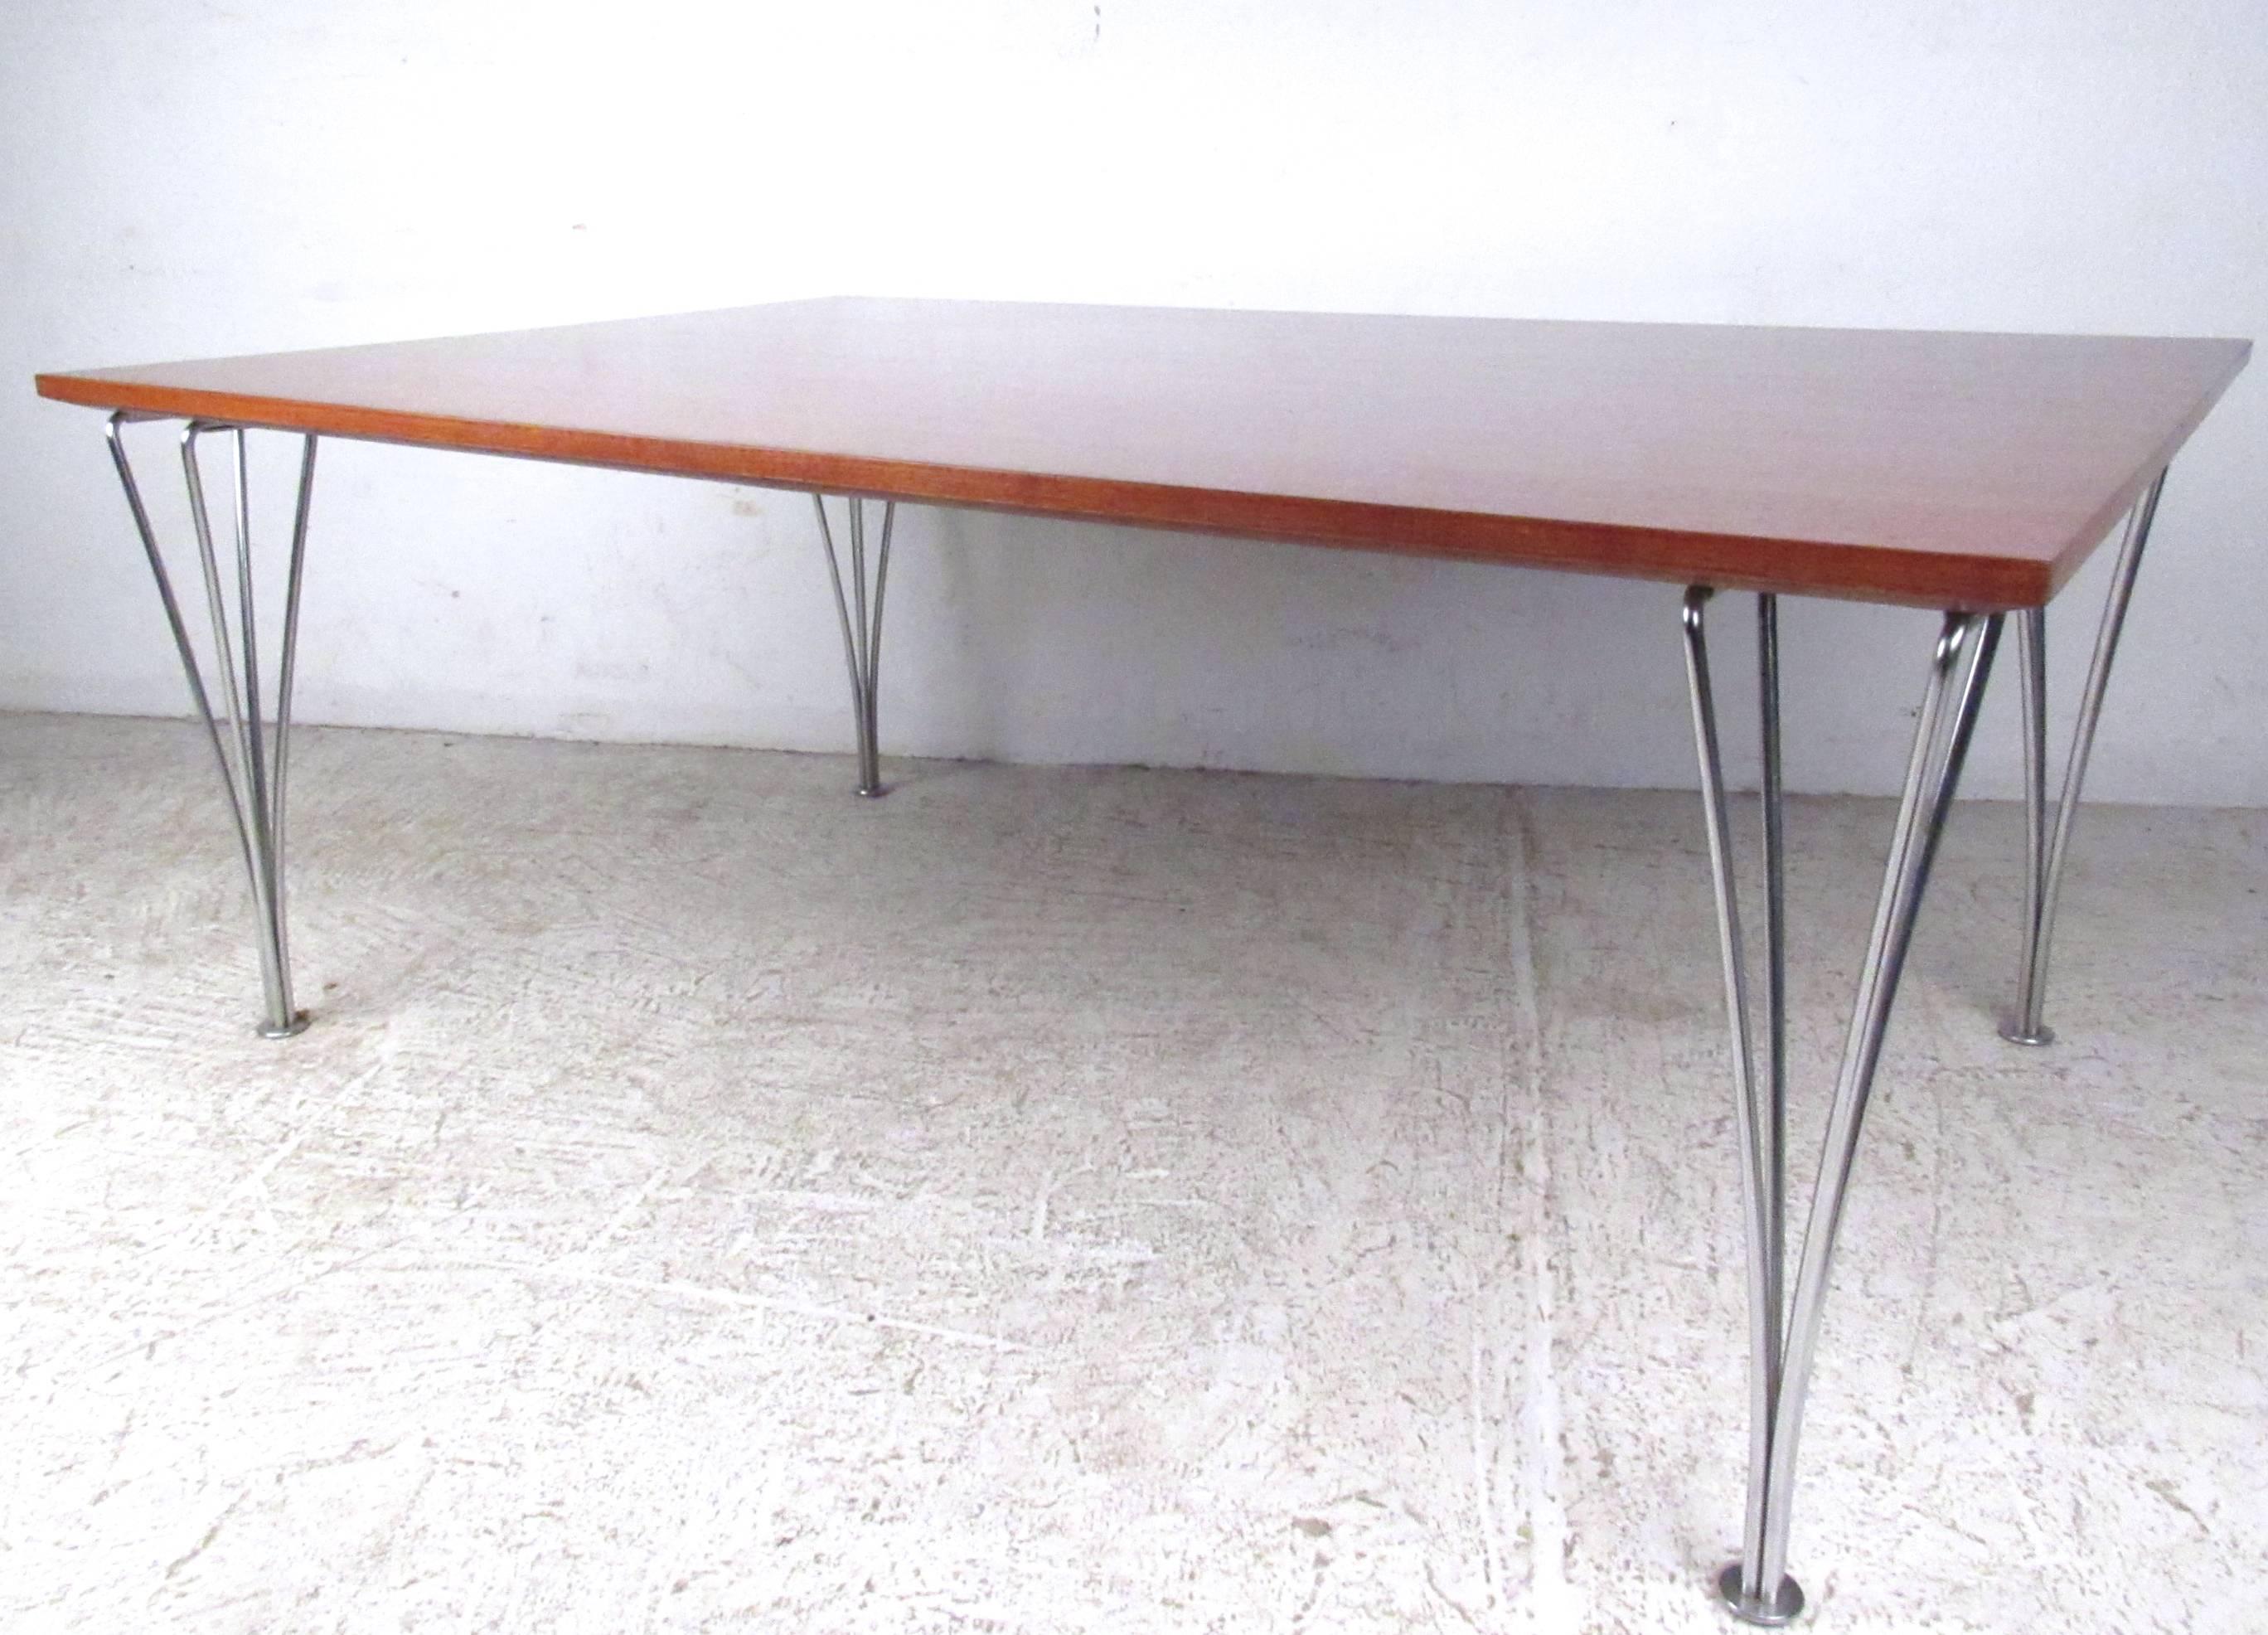 This beautiful vintage table features unique sculptural legs and a wide hardwood top. Unique design attributed to Bruno Mathsson and Piet Hein for Fritz Hansen. Please confirm item location (NY or NJ).